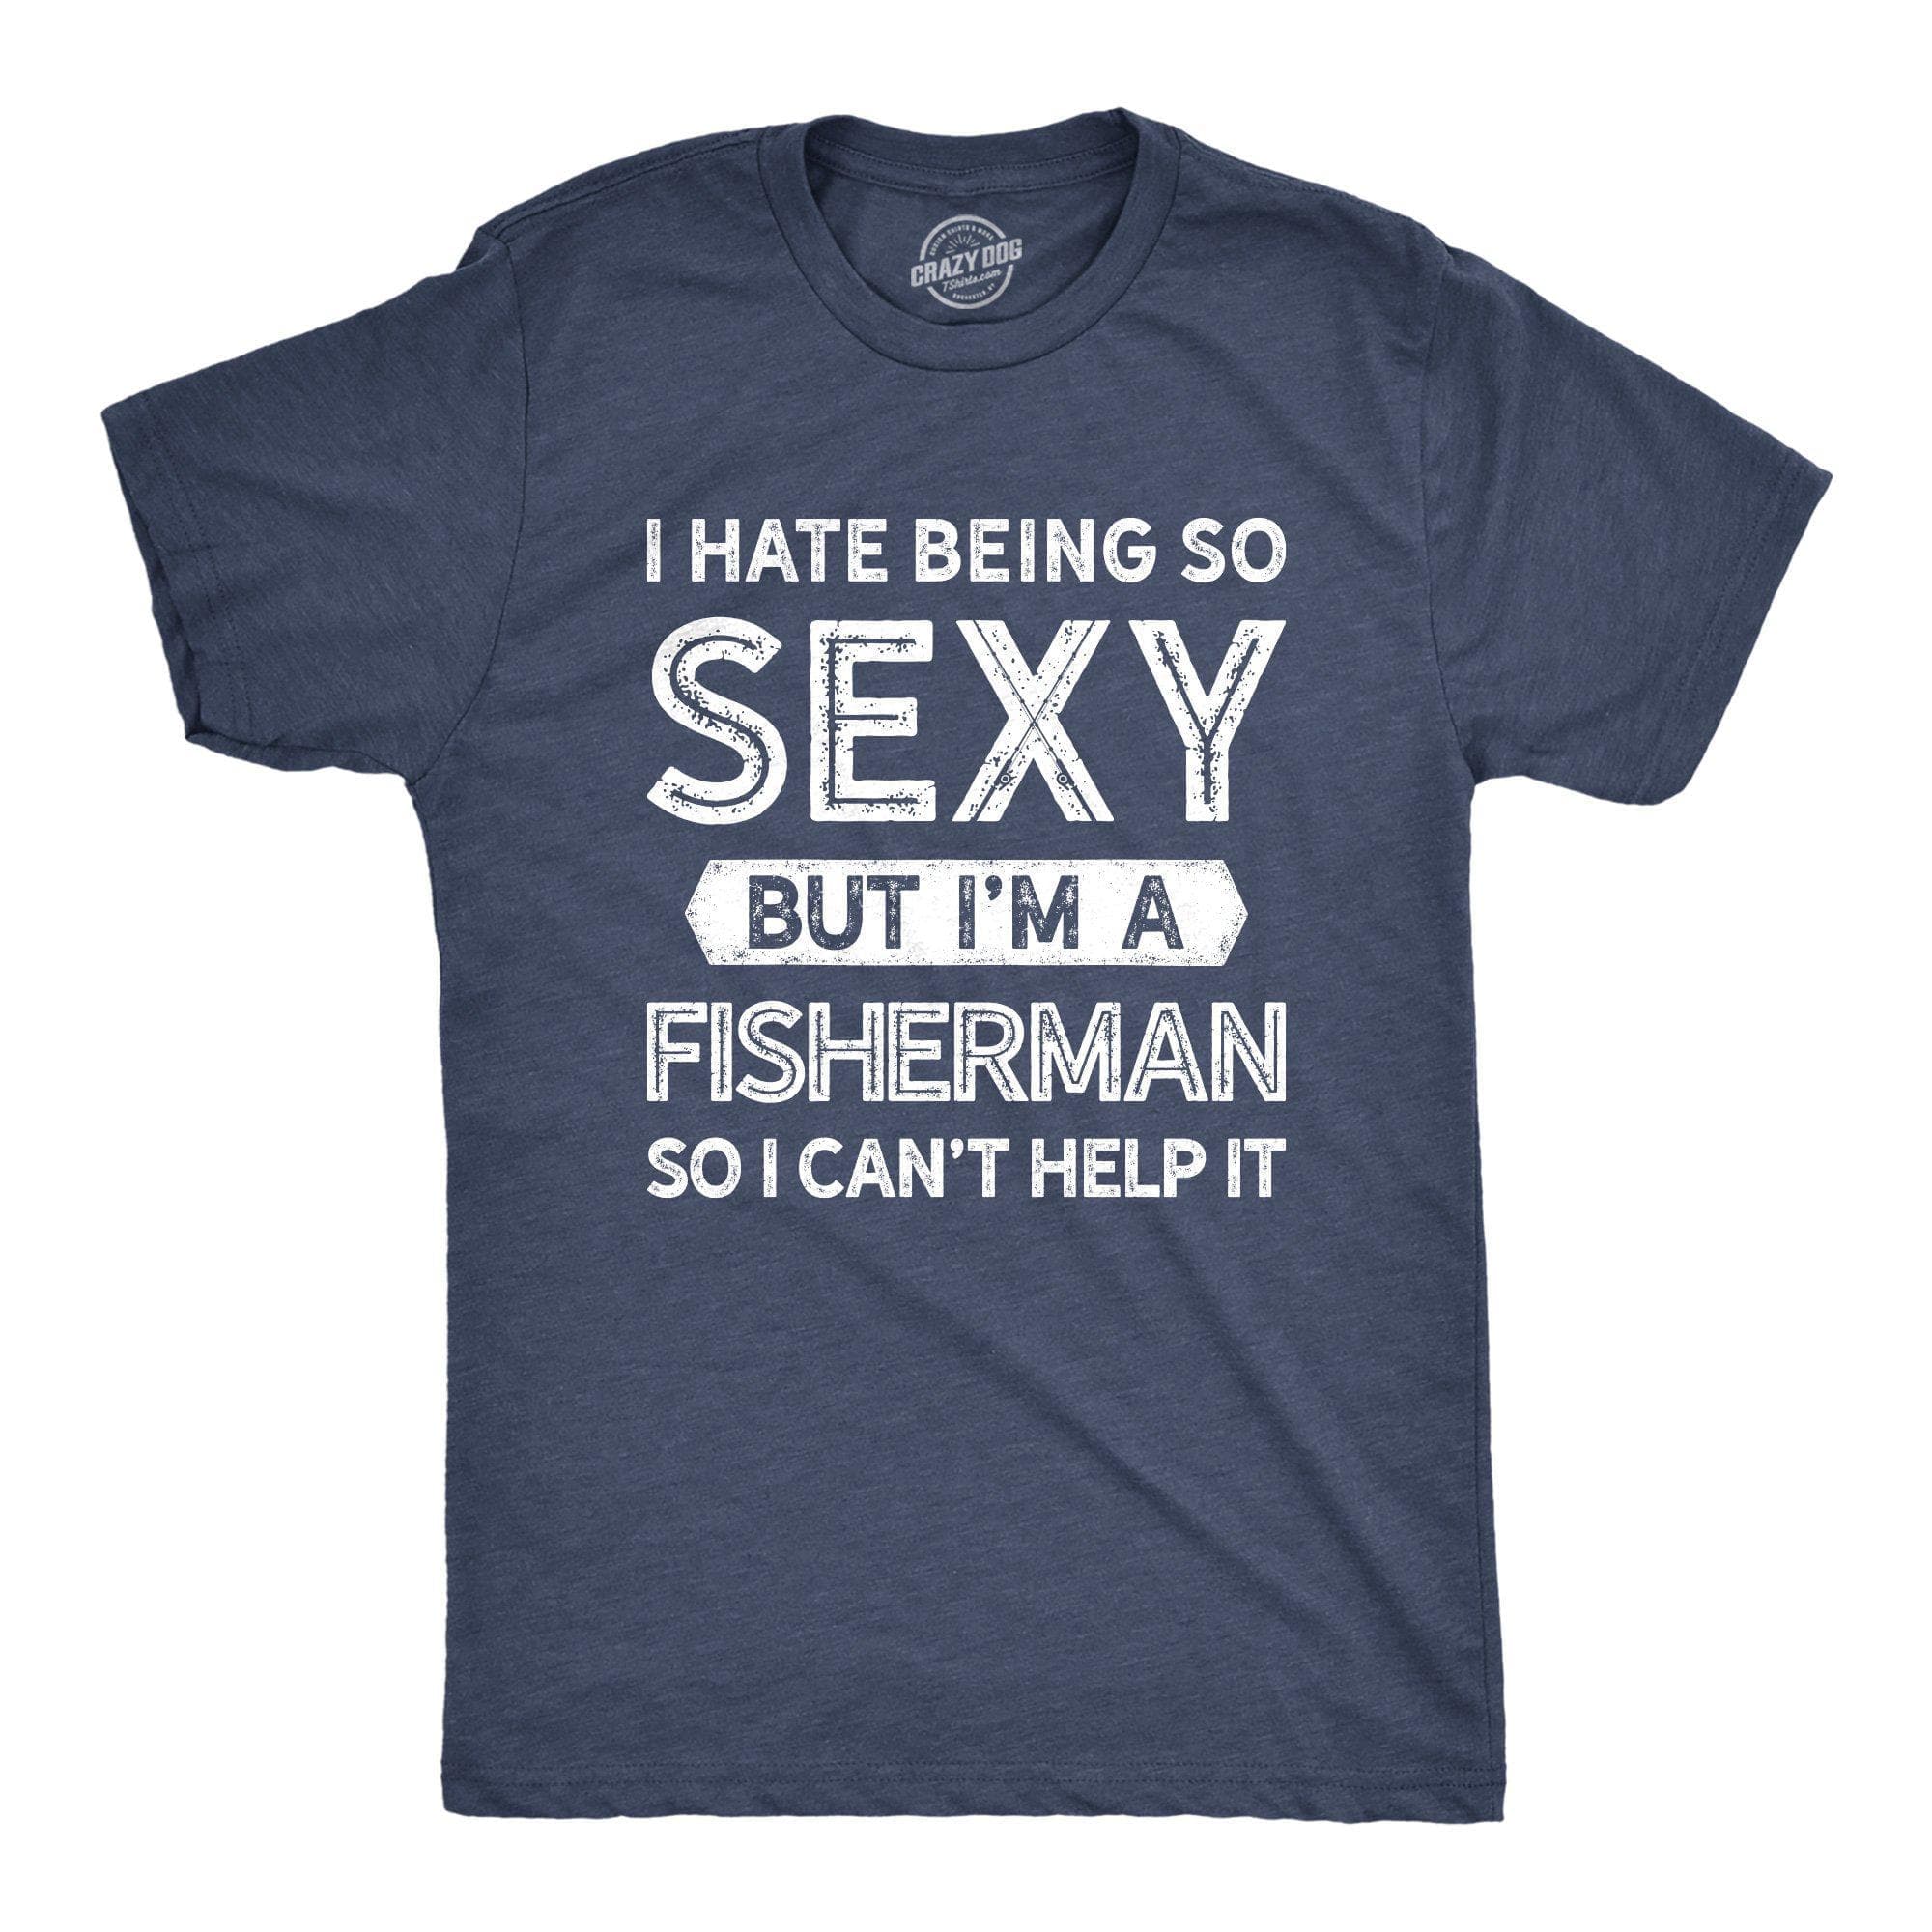 I Hate Being So Sexy But I'm A Fisherman Men's Tshirt - Crazy Dog T-Shirts